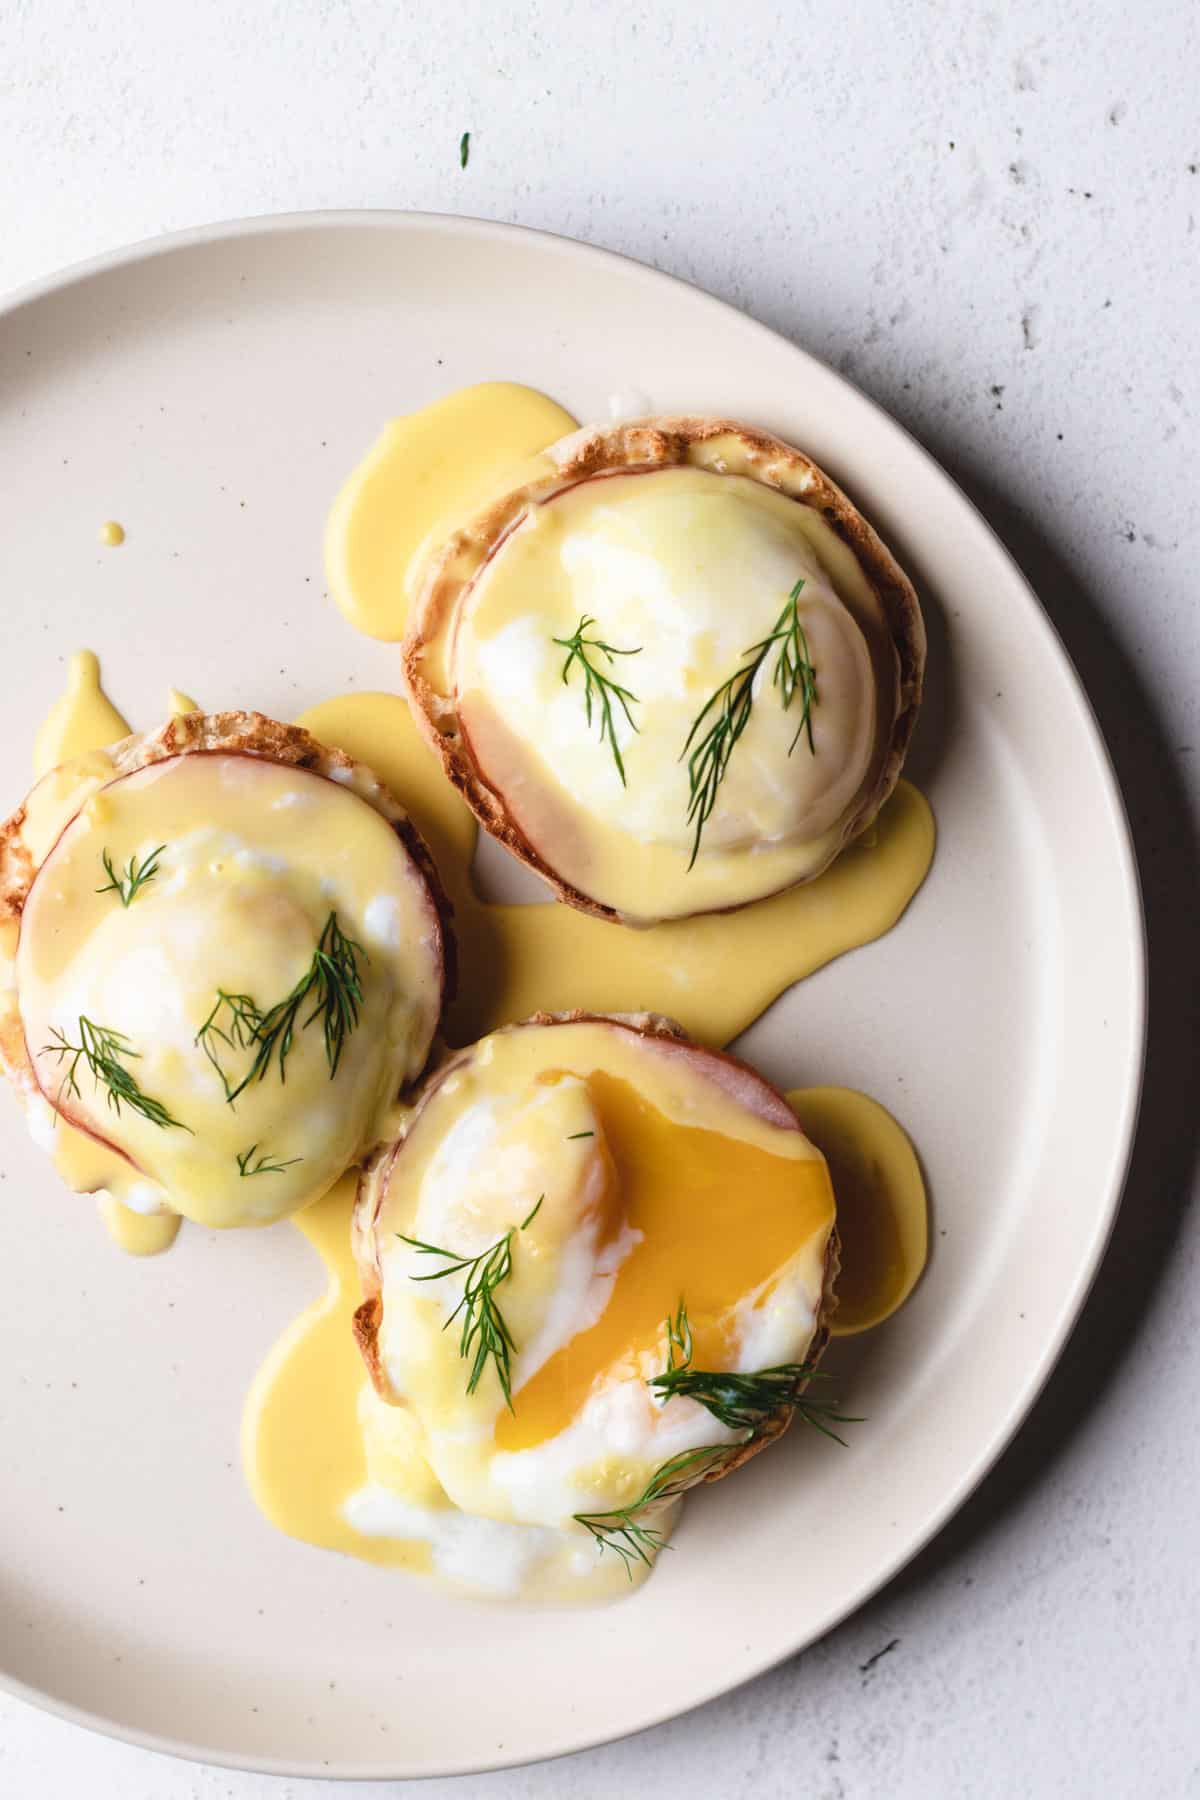 Threes eggs benedict on a large plate garnished with fresh dill.